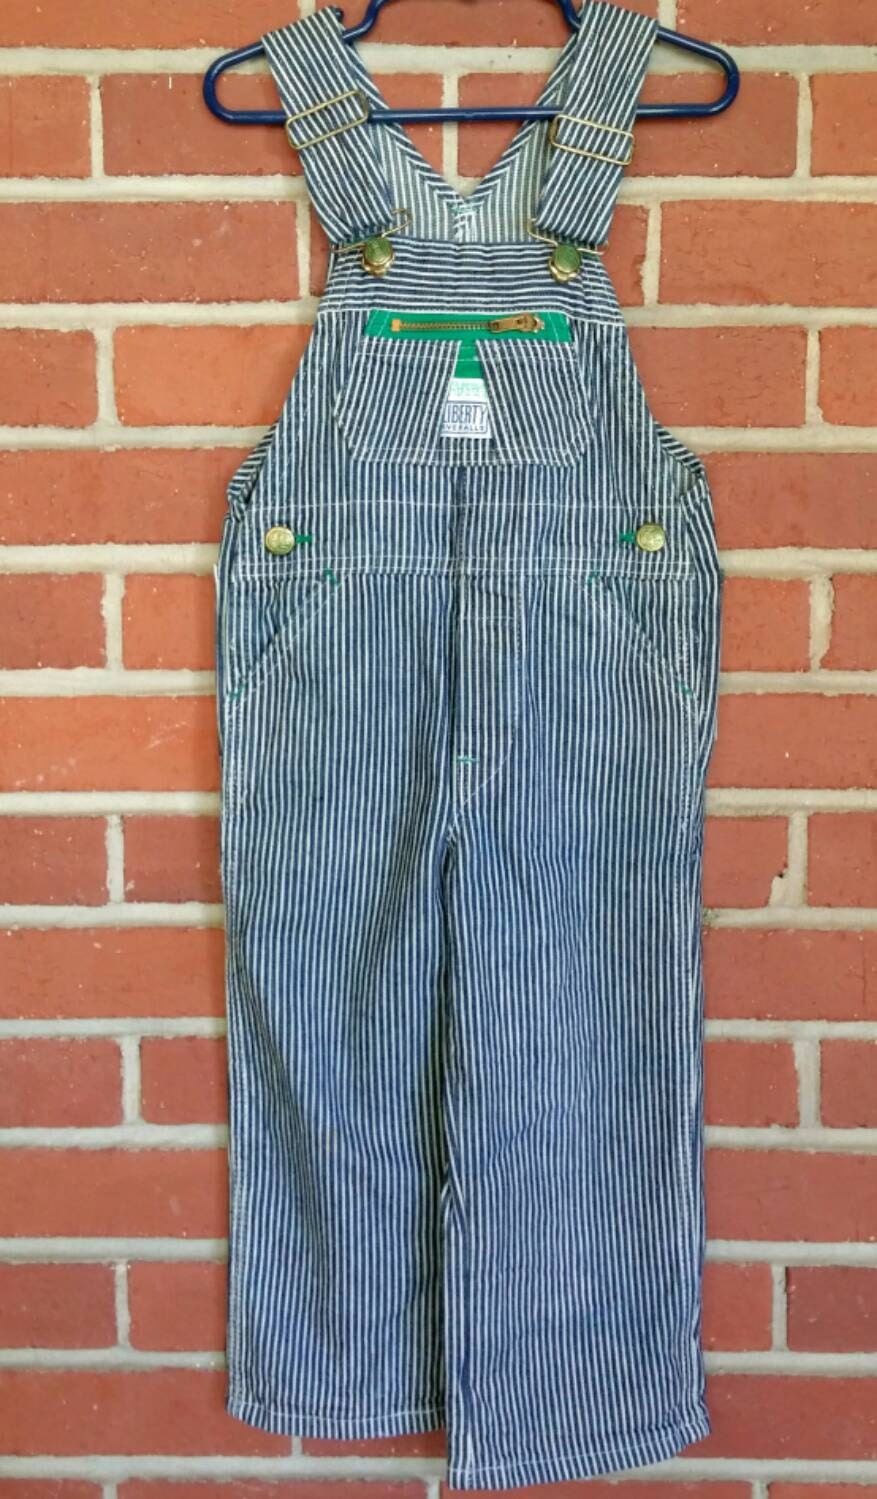 Vintage Liberty Overalls boys 3-4T striped Made by BrokenInVintage